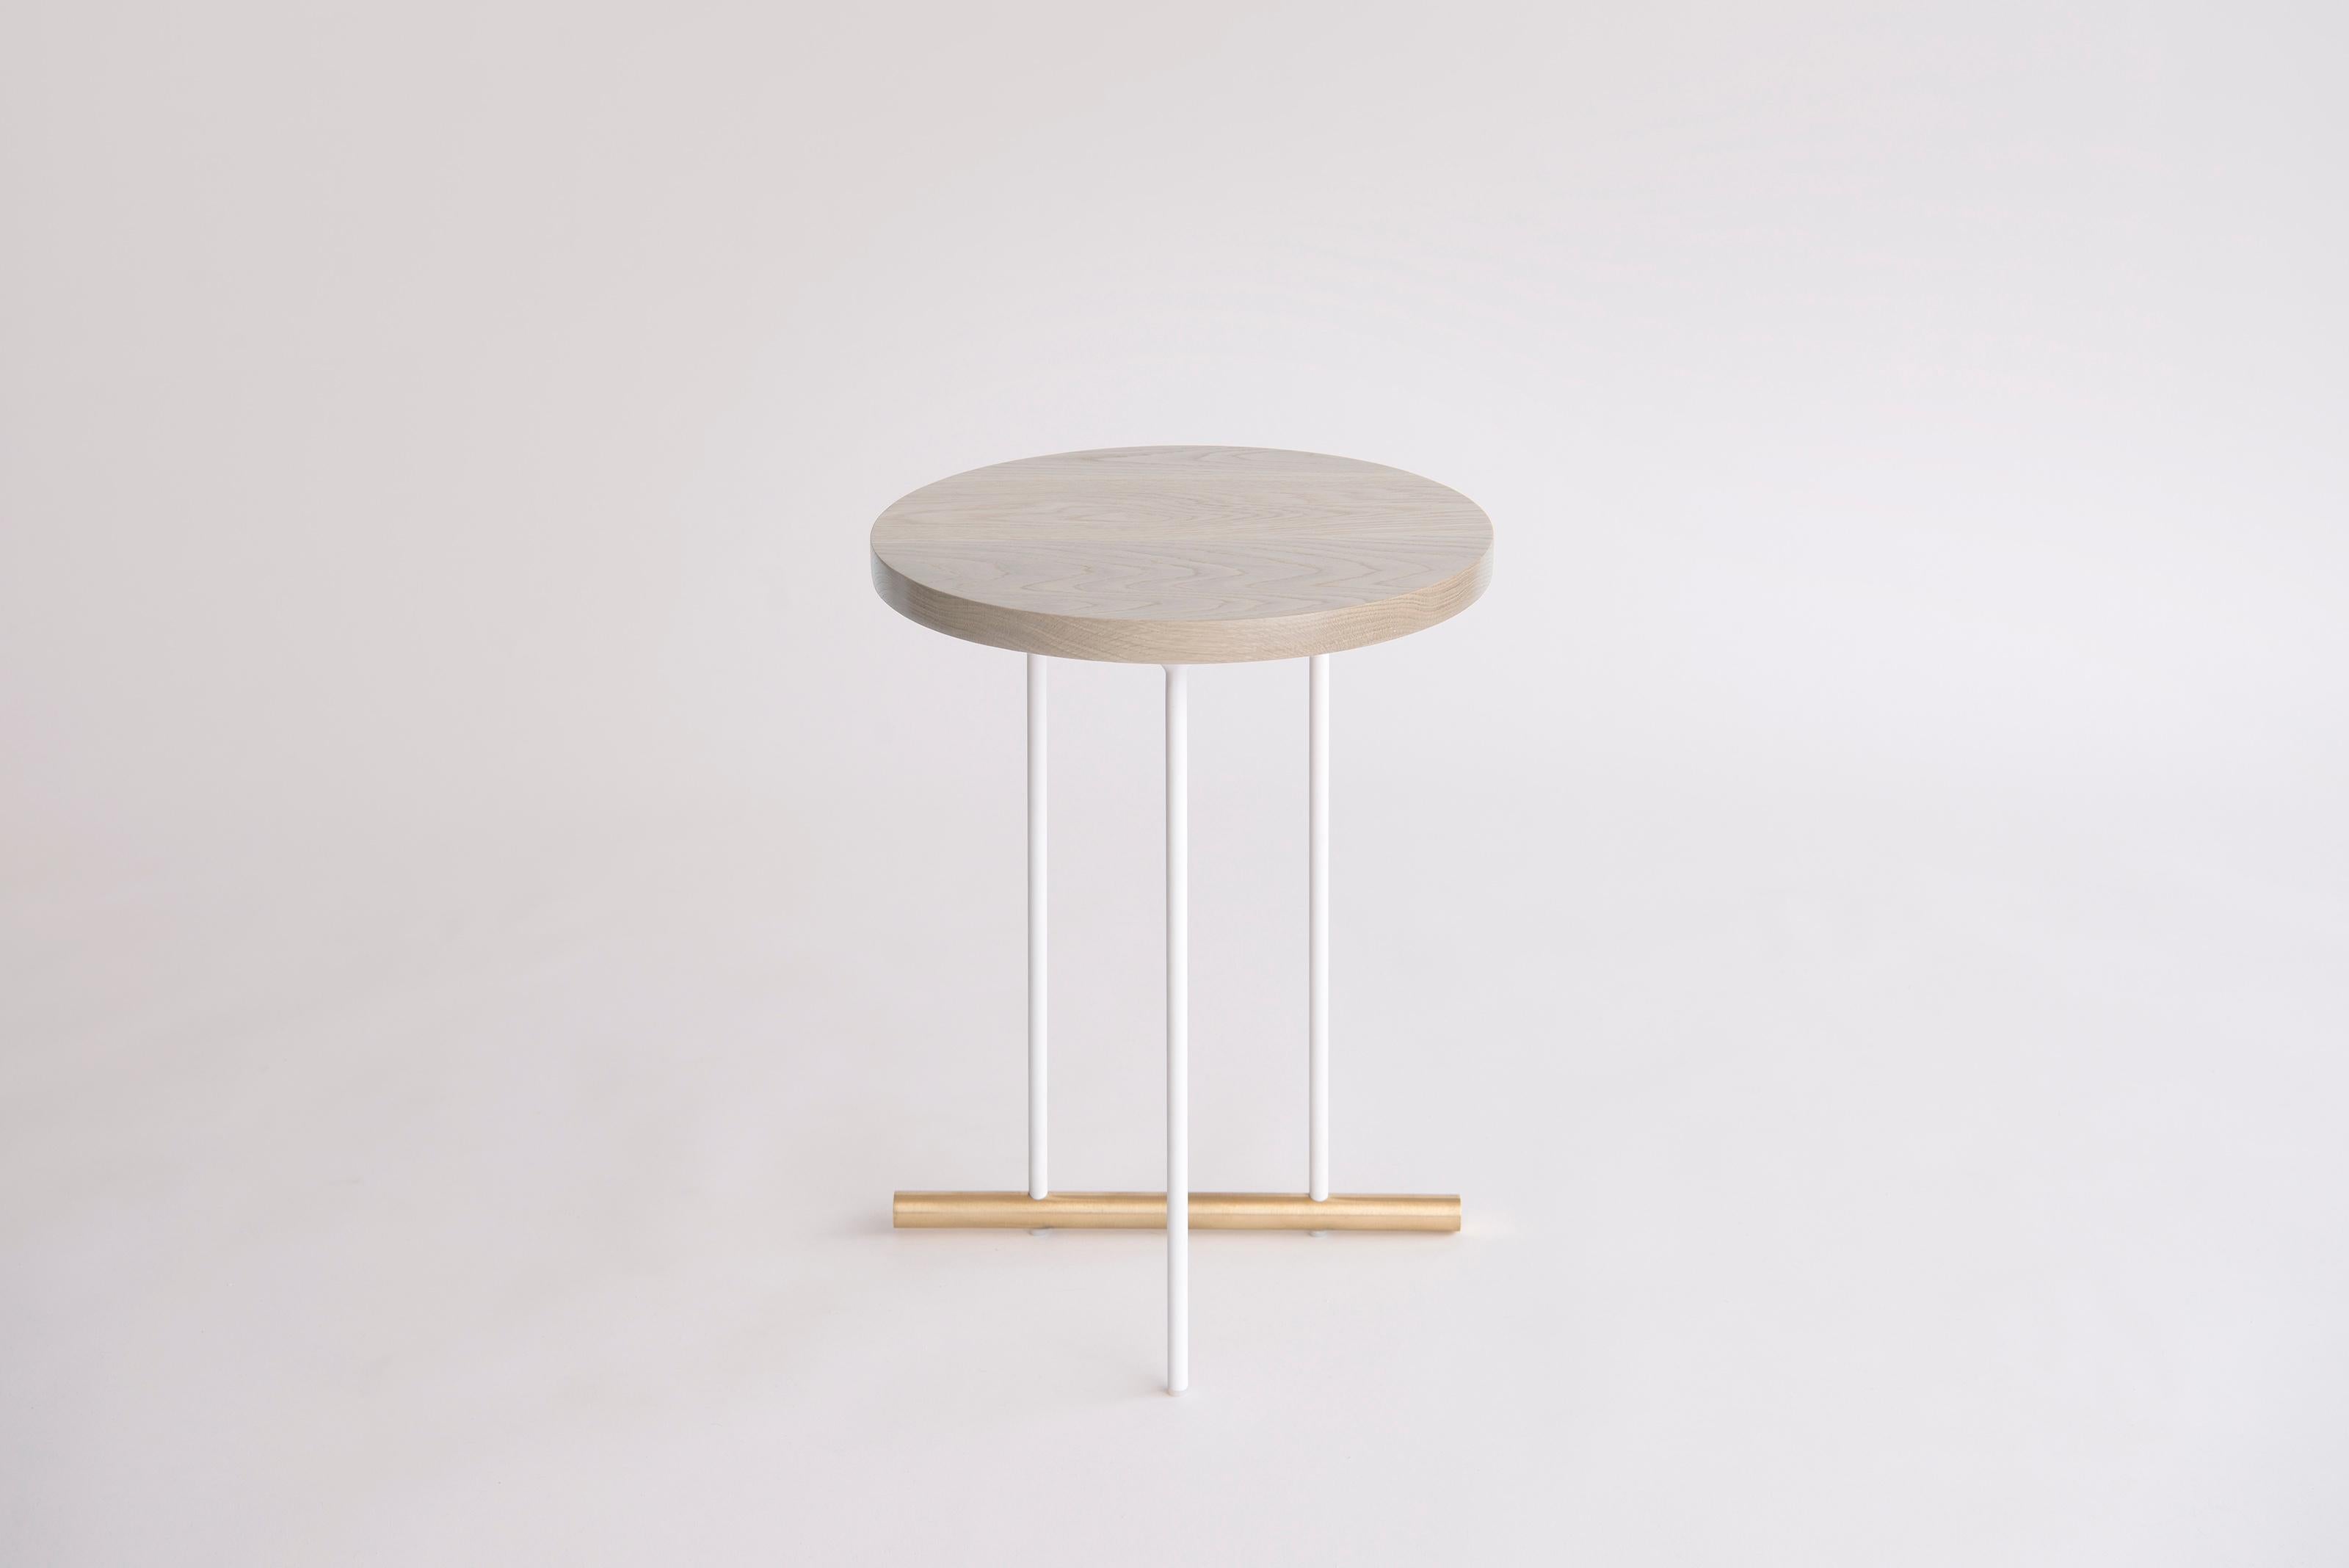 Icon Small White Oak Side Table by Phase Design
Dimensions: Ø 38,1 x H 51.5 cm. 
Materials: White oak, powder-coated metal and brushed brass.

Solid steel and brass with glass, marble, or solid wooden tops. Steel bar available in a flat black or